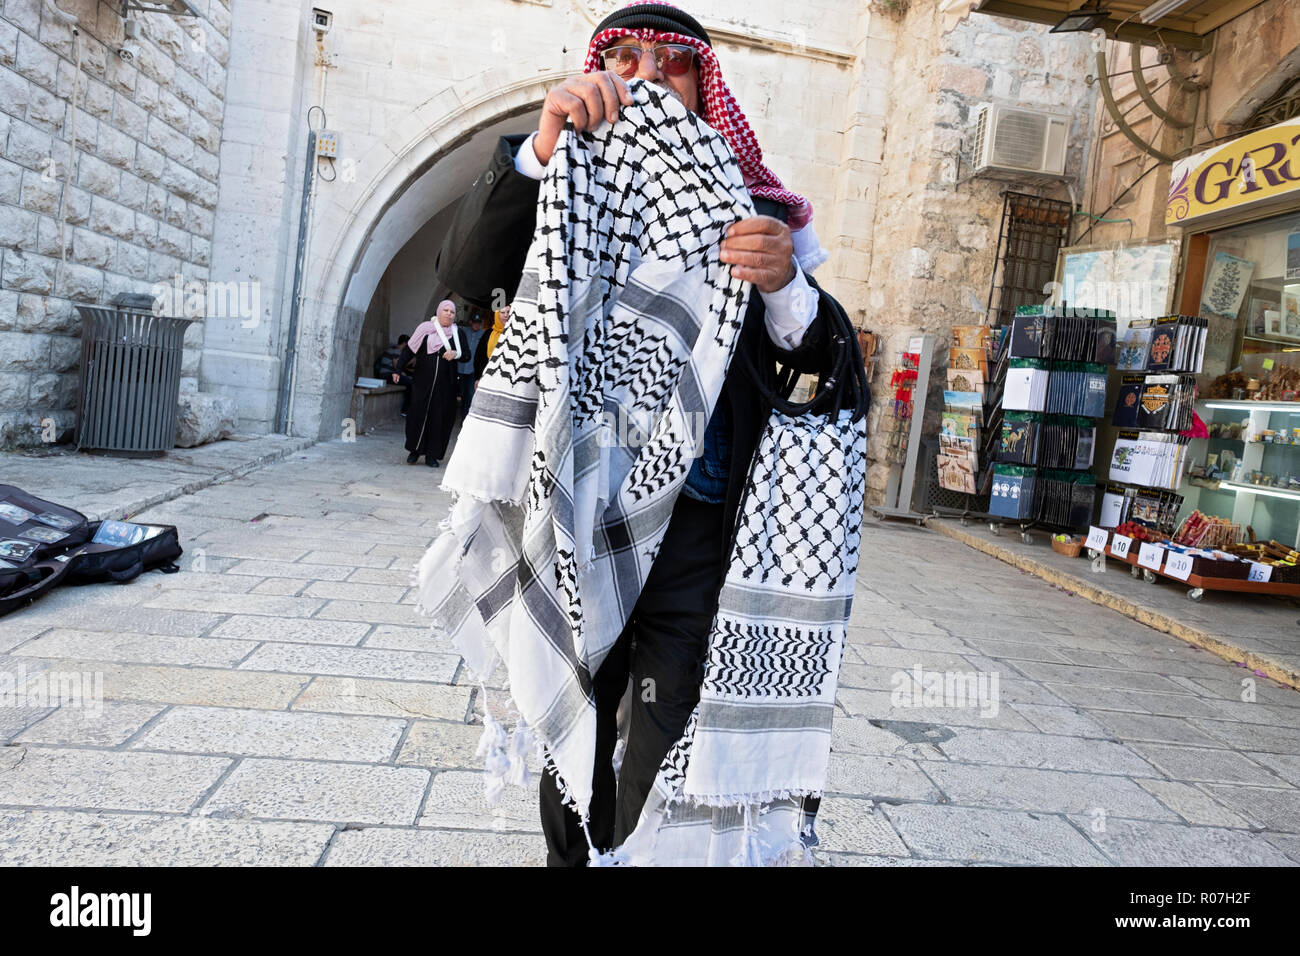 An older Arab man peddling arabic scarves to tourists in the Old City, Jerusalem, Israel. Stock Photo